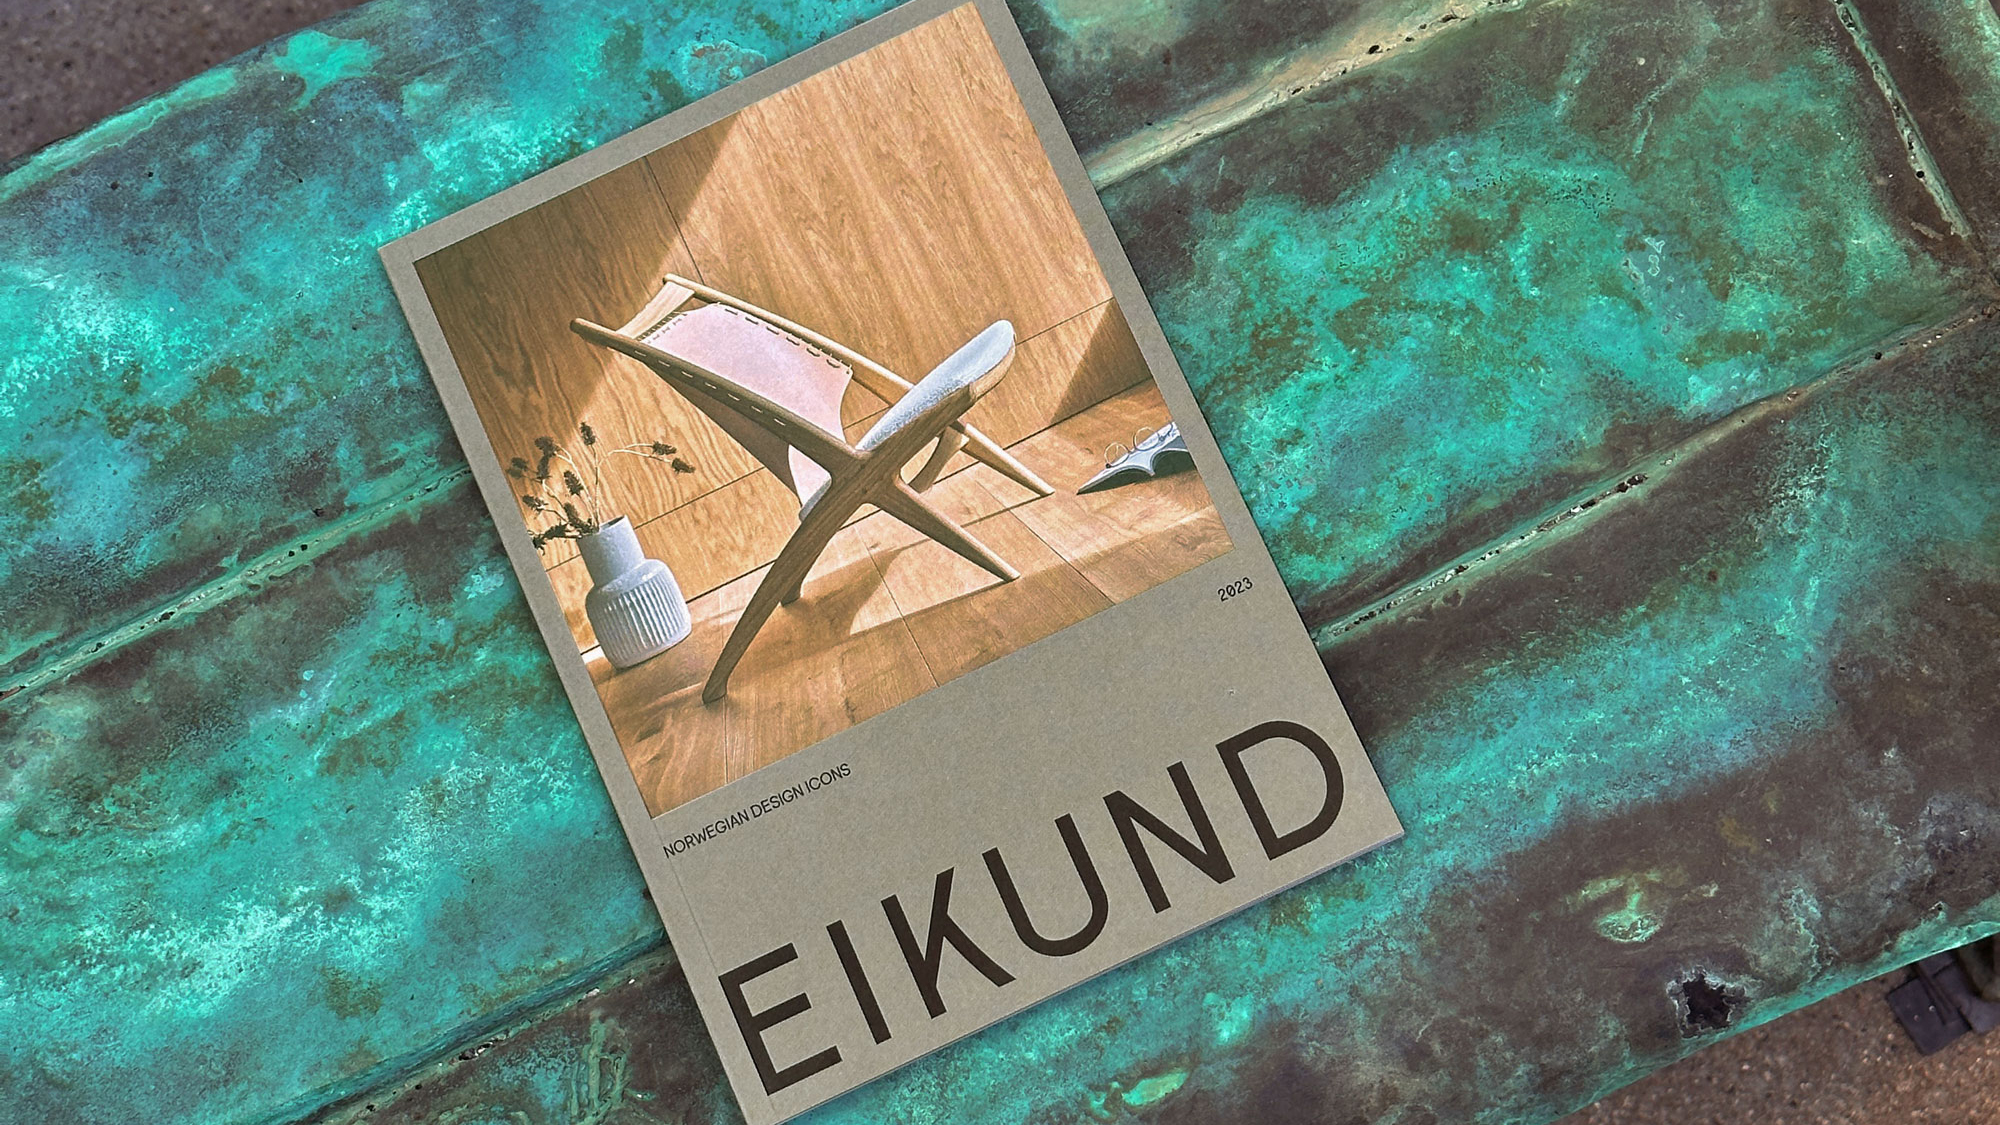 Eikund unveiled several exciting launches at 3daysofdesign